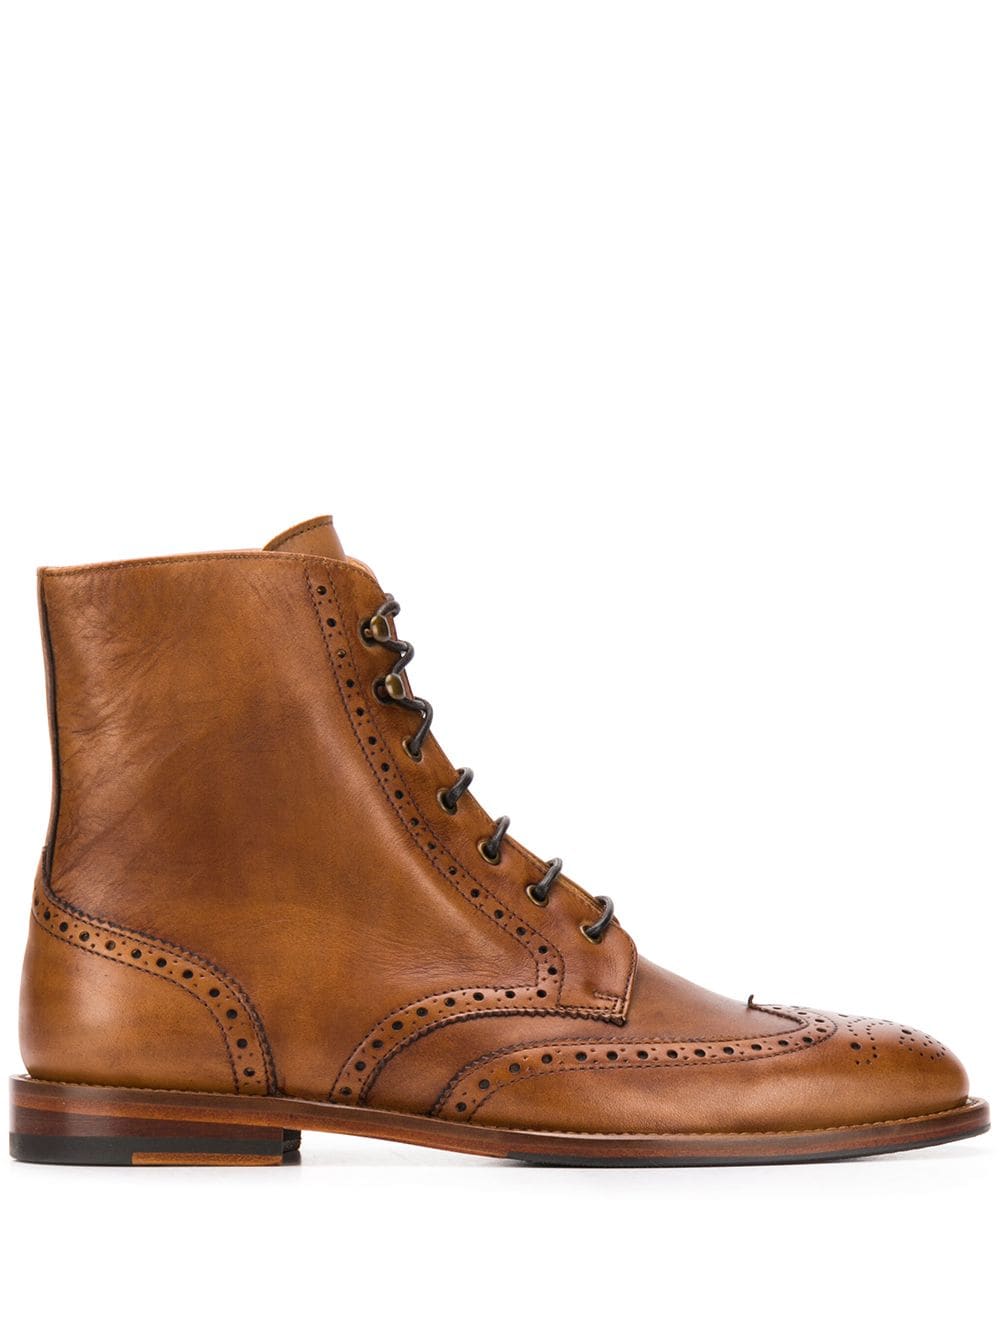 Scarosso Stefania lace-up boots - Brown von Scarosso